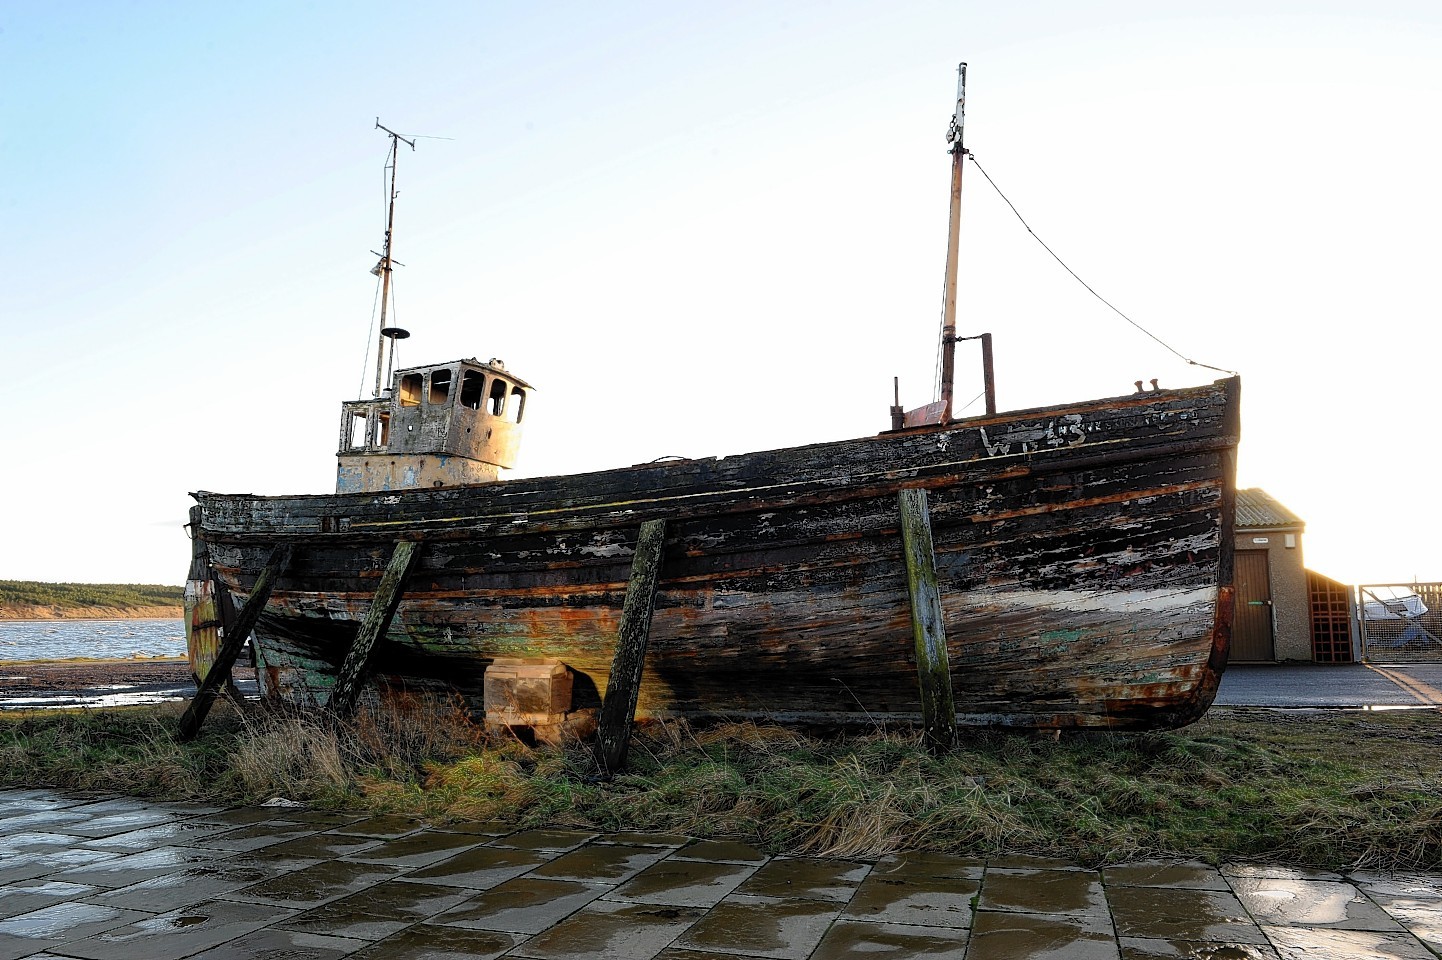 The century-old fishing boat in Burghead